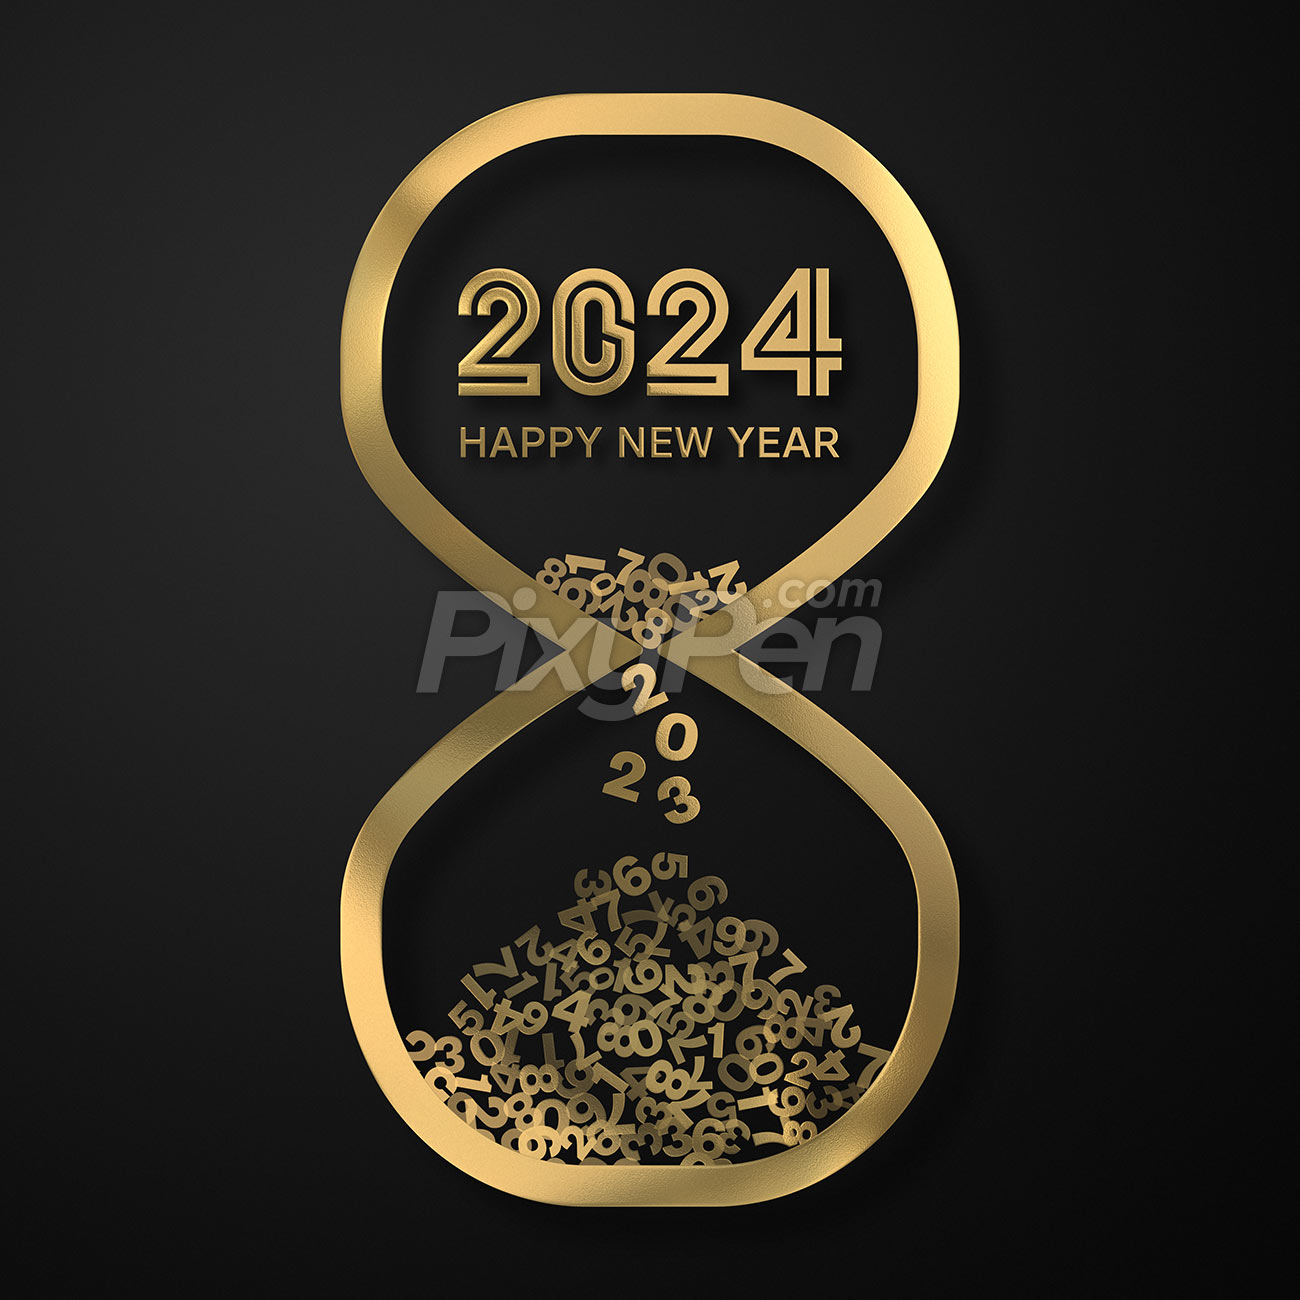 Happy New Year 2024 Wallapers